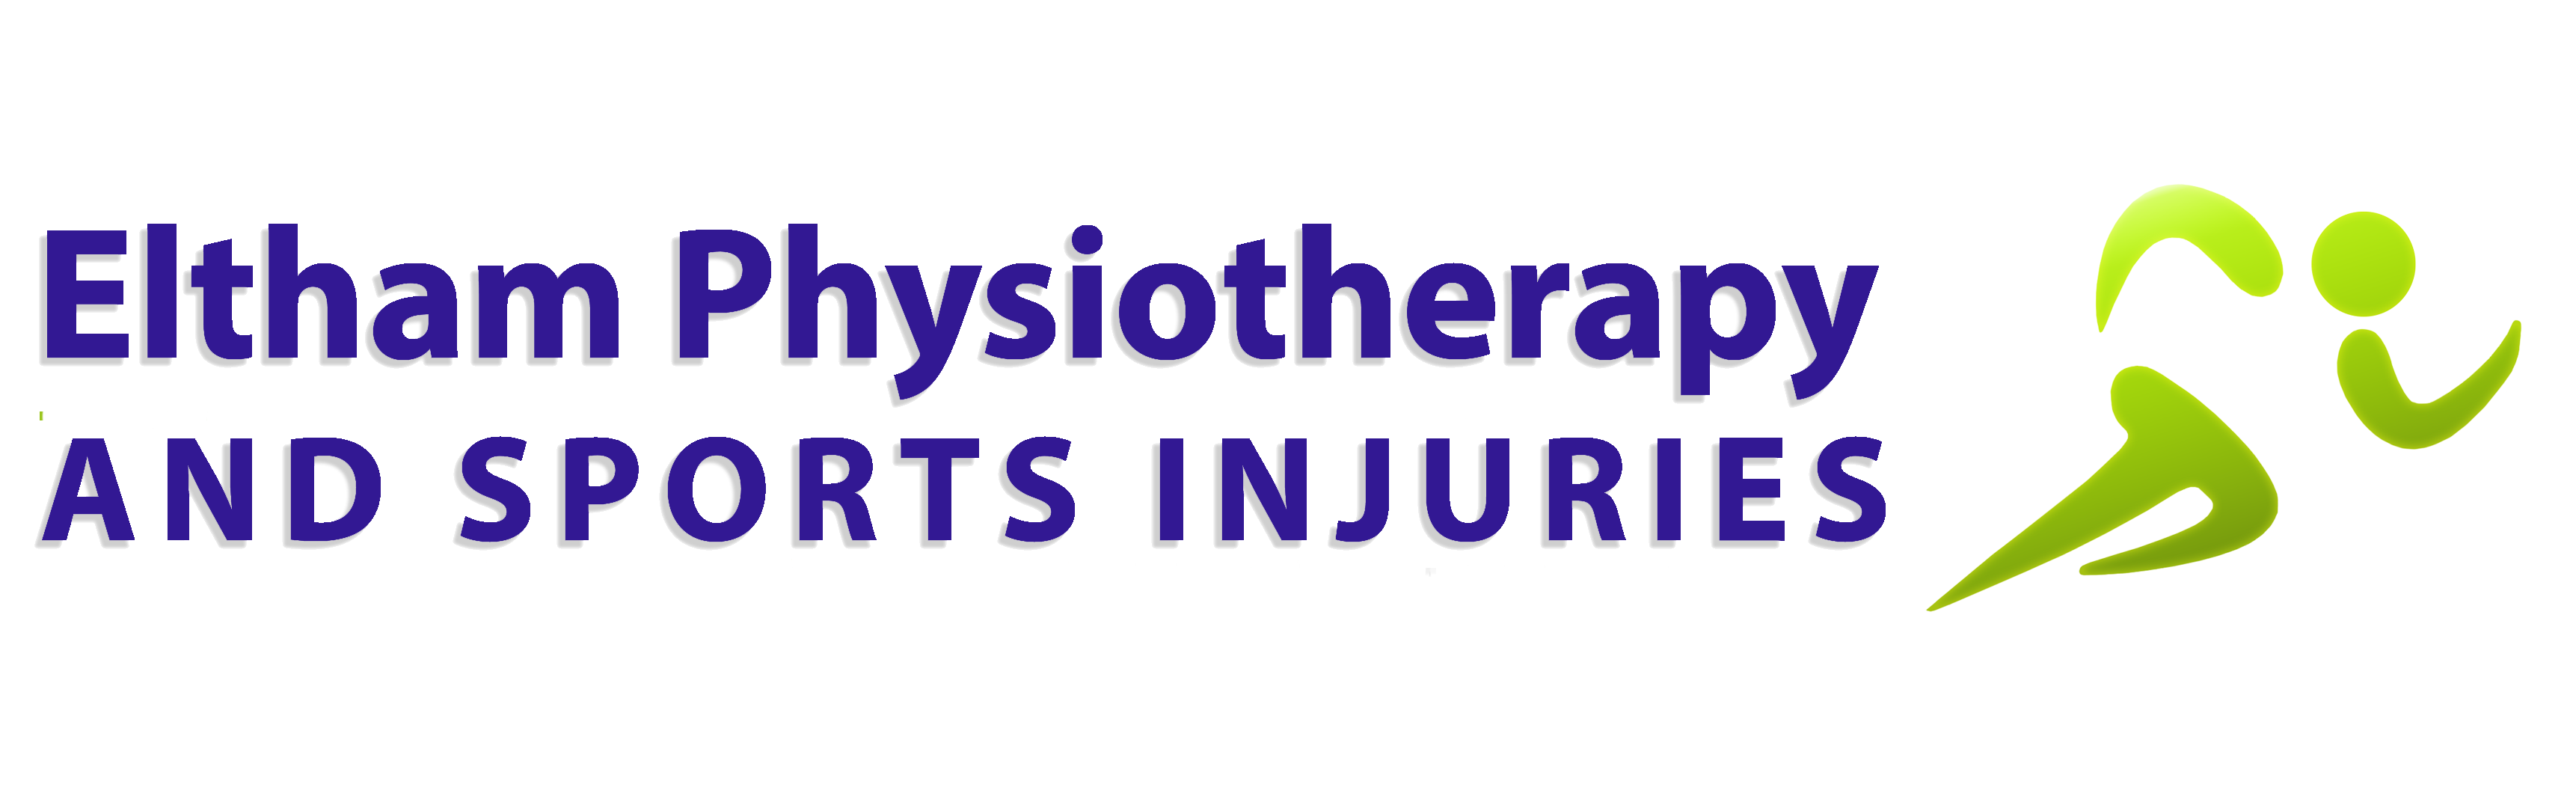 Eltham Physiotherapy and Sports Injuries